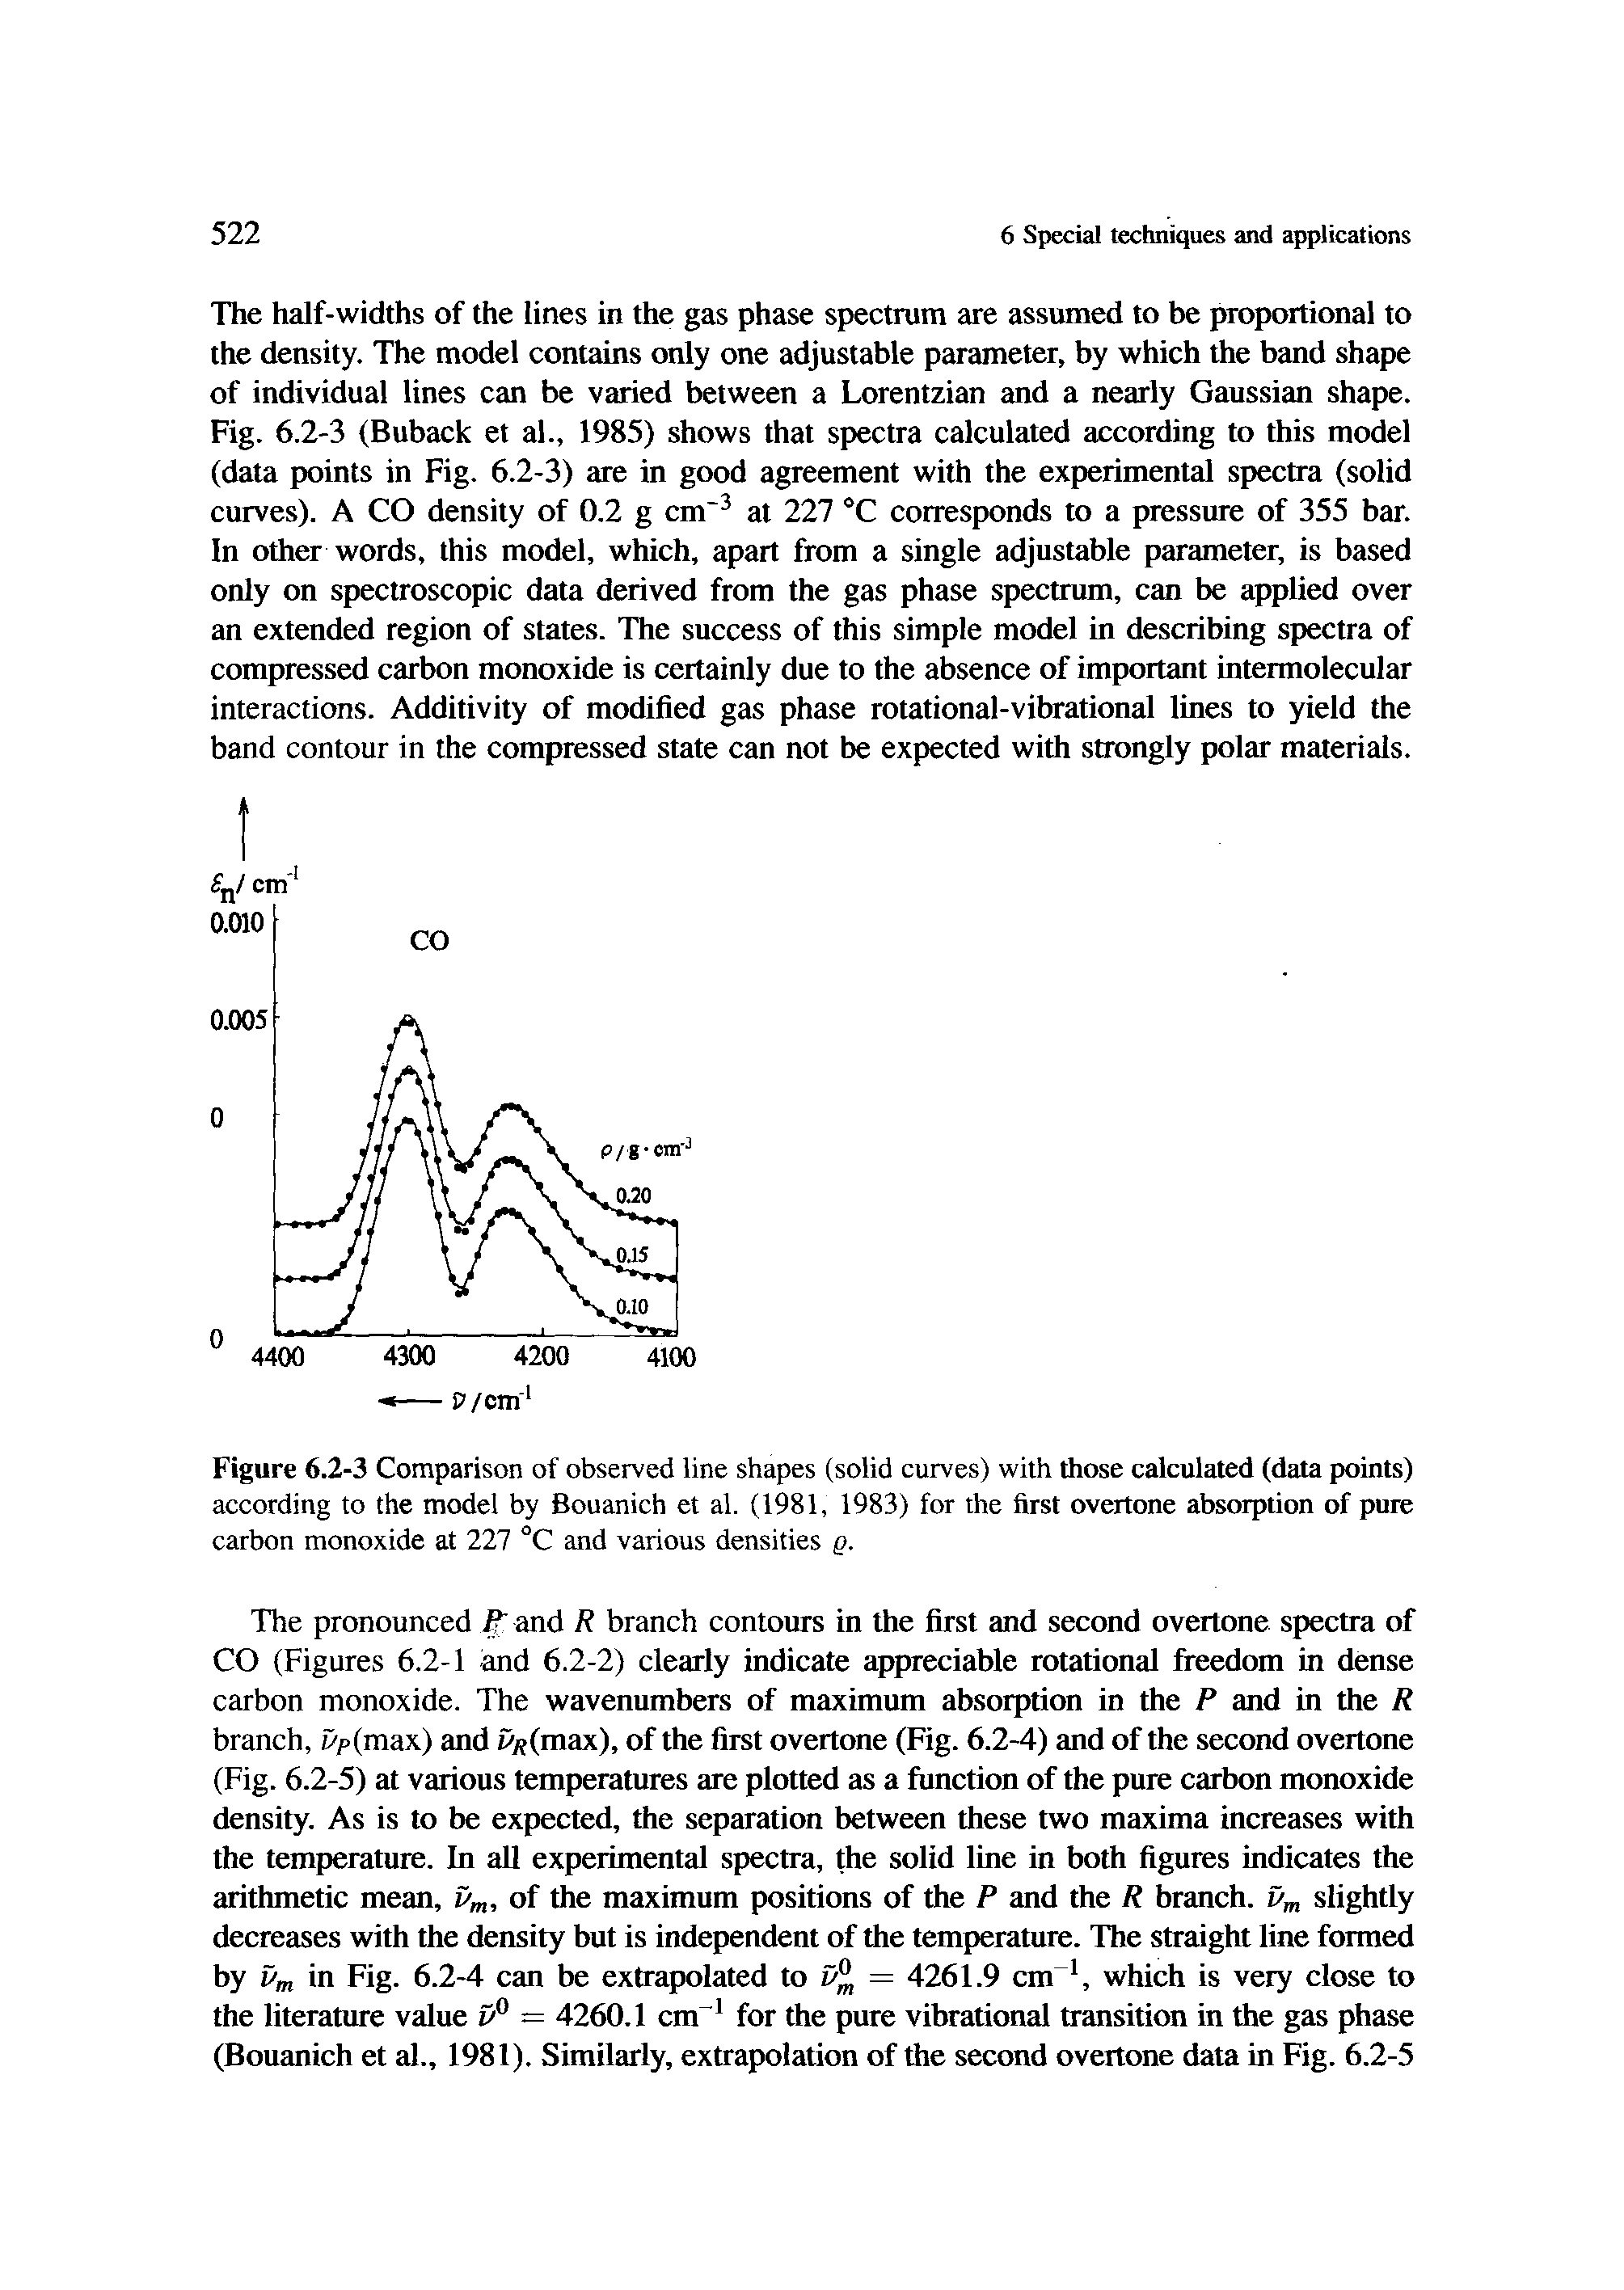 Figure 6.2-3 Comparison of observed line shapes (solid curves) with those calculated (data points) according to the model by Bouanich et al. (1981, 1983) for the first overtone absorption of pure carbon monoxide at 227 °C and various densities g.